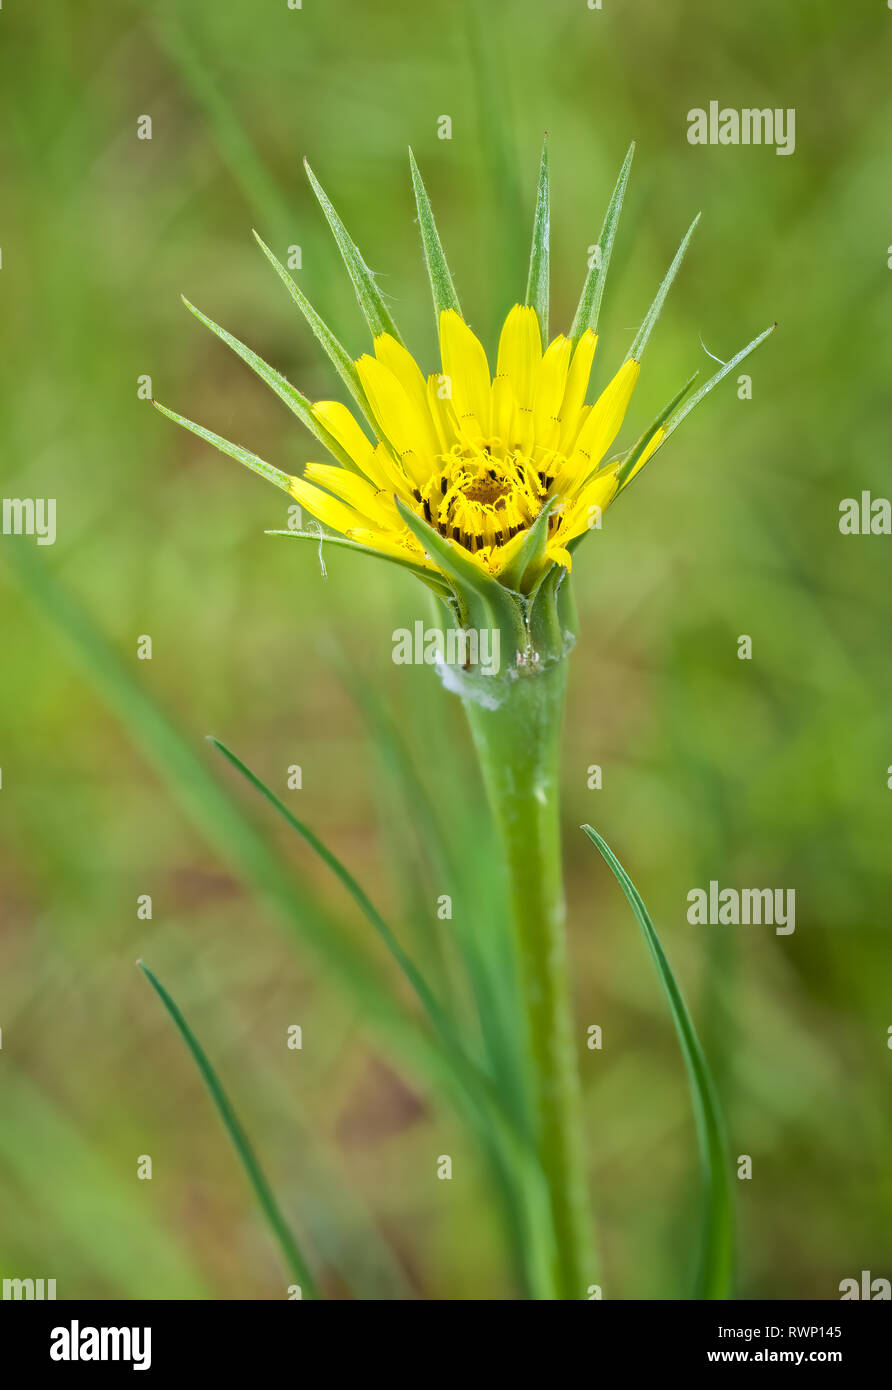 Yellow goat's beard (Tragopogon pratensis) flower in spring in central Virginia Stock Photo